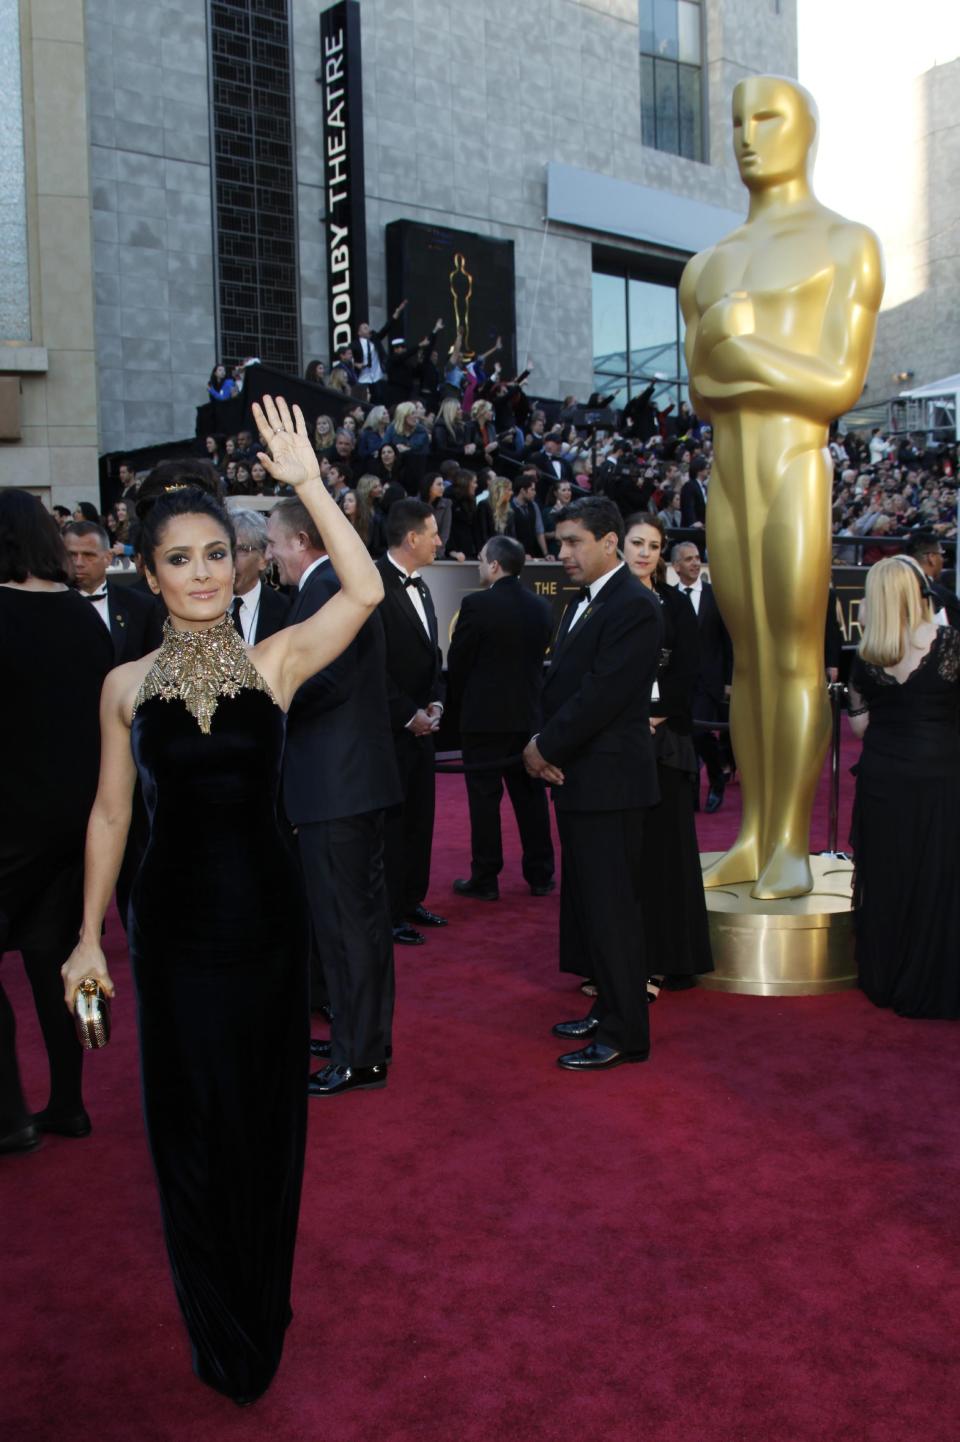 Actress Salma Hayek arrives at the Oscars at the Dolby Theatre on Sunday Feb. 24, 2013, in Los Angeles. (Photo by Carlo Allegri/Invision/AP)